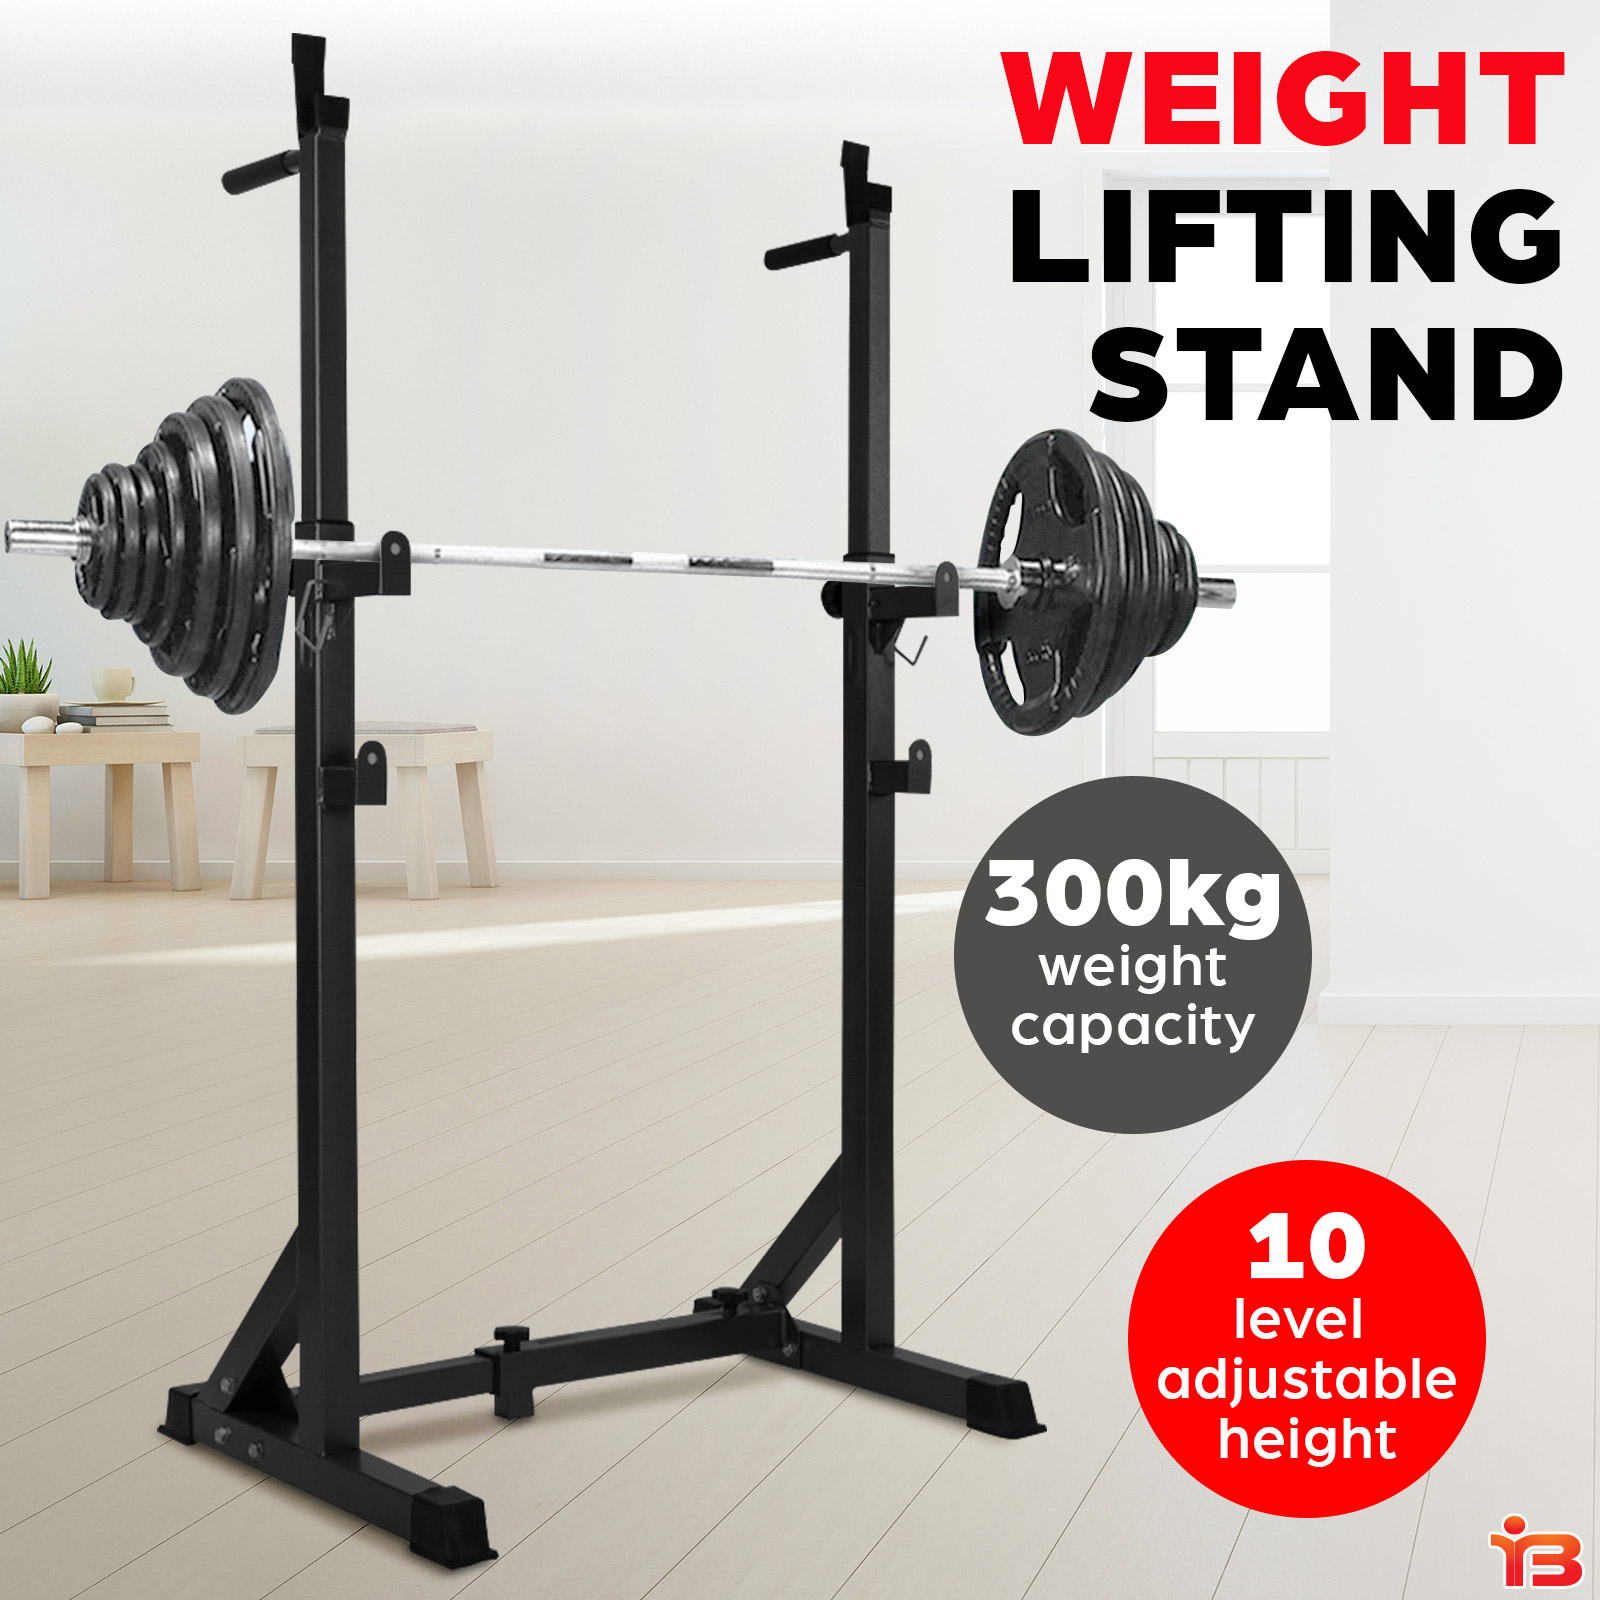 Squat Rack Pair Weight Lifting Gym Fitness Exercise Everfit Barbell Stand